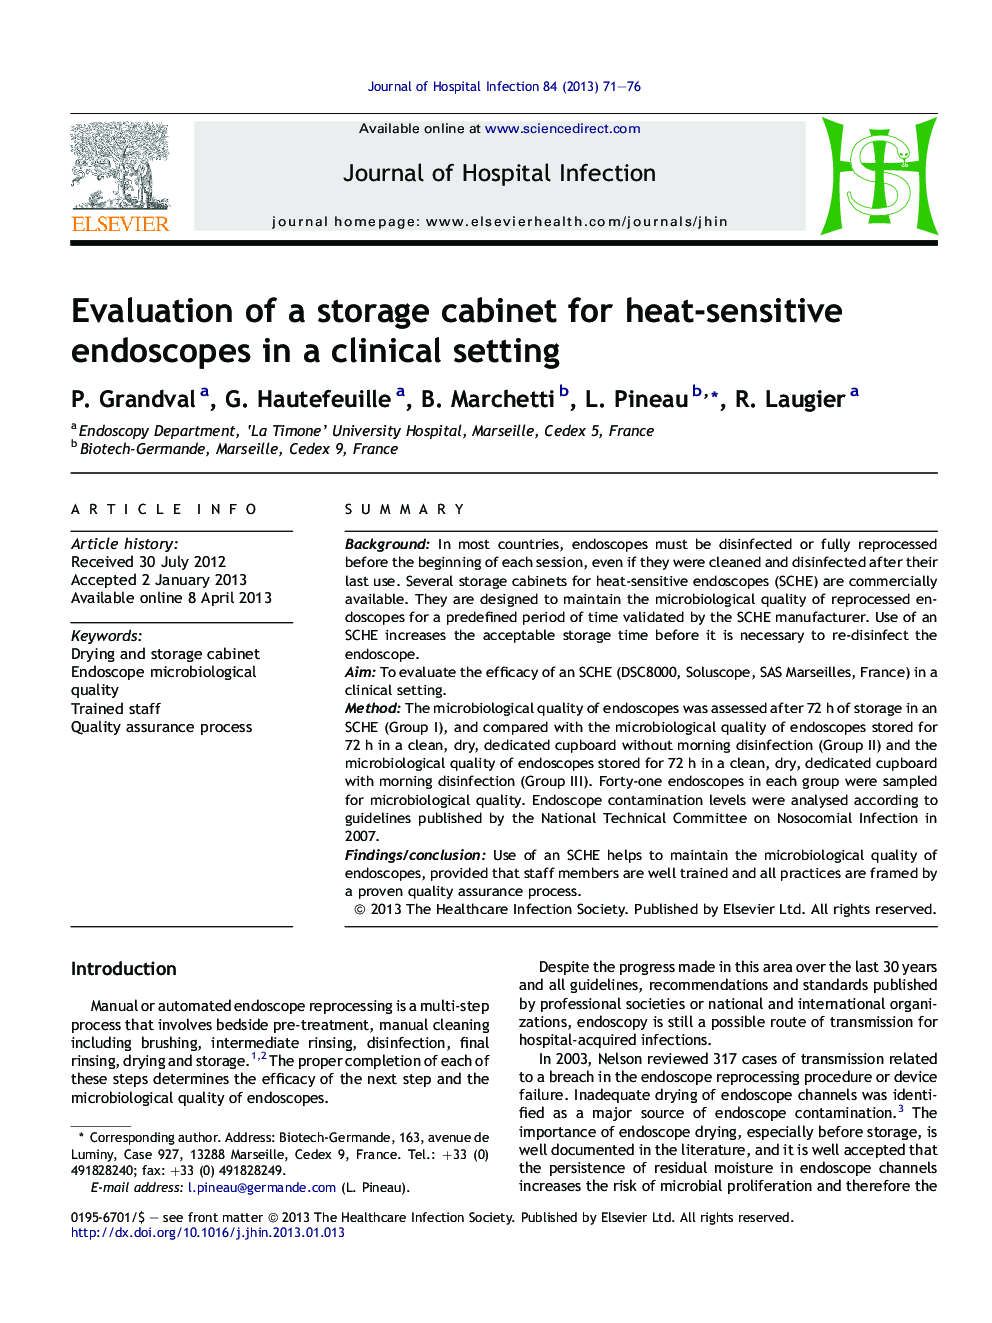 Evaluation of a storage cabinet for heat-sensitive endoscopes in a clinical setting